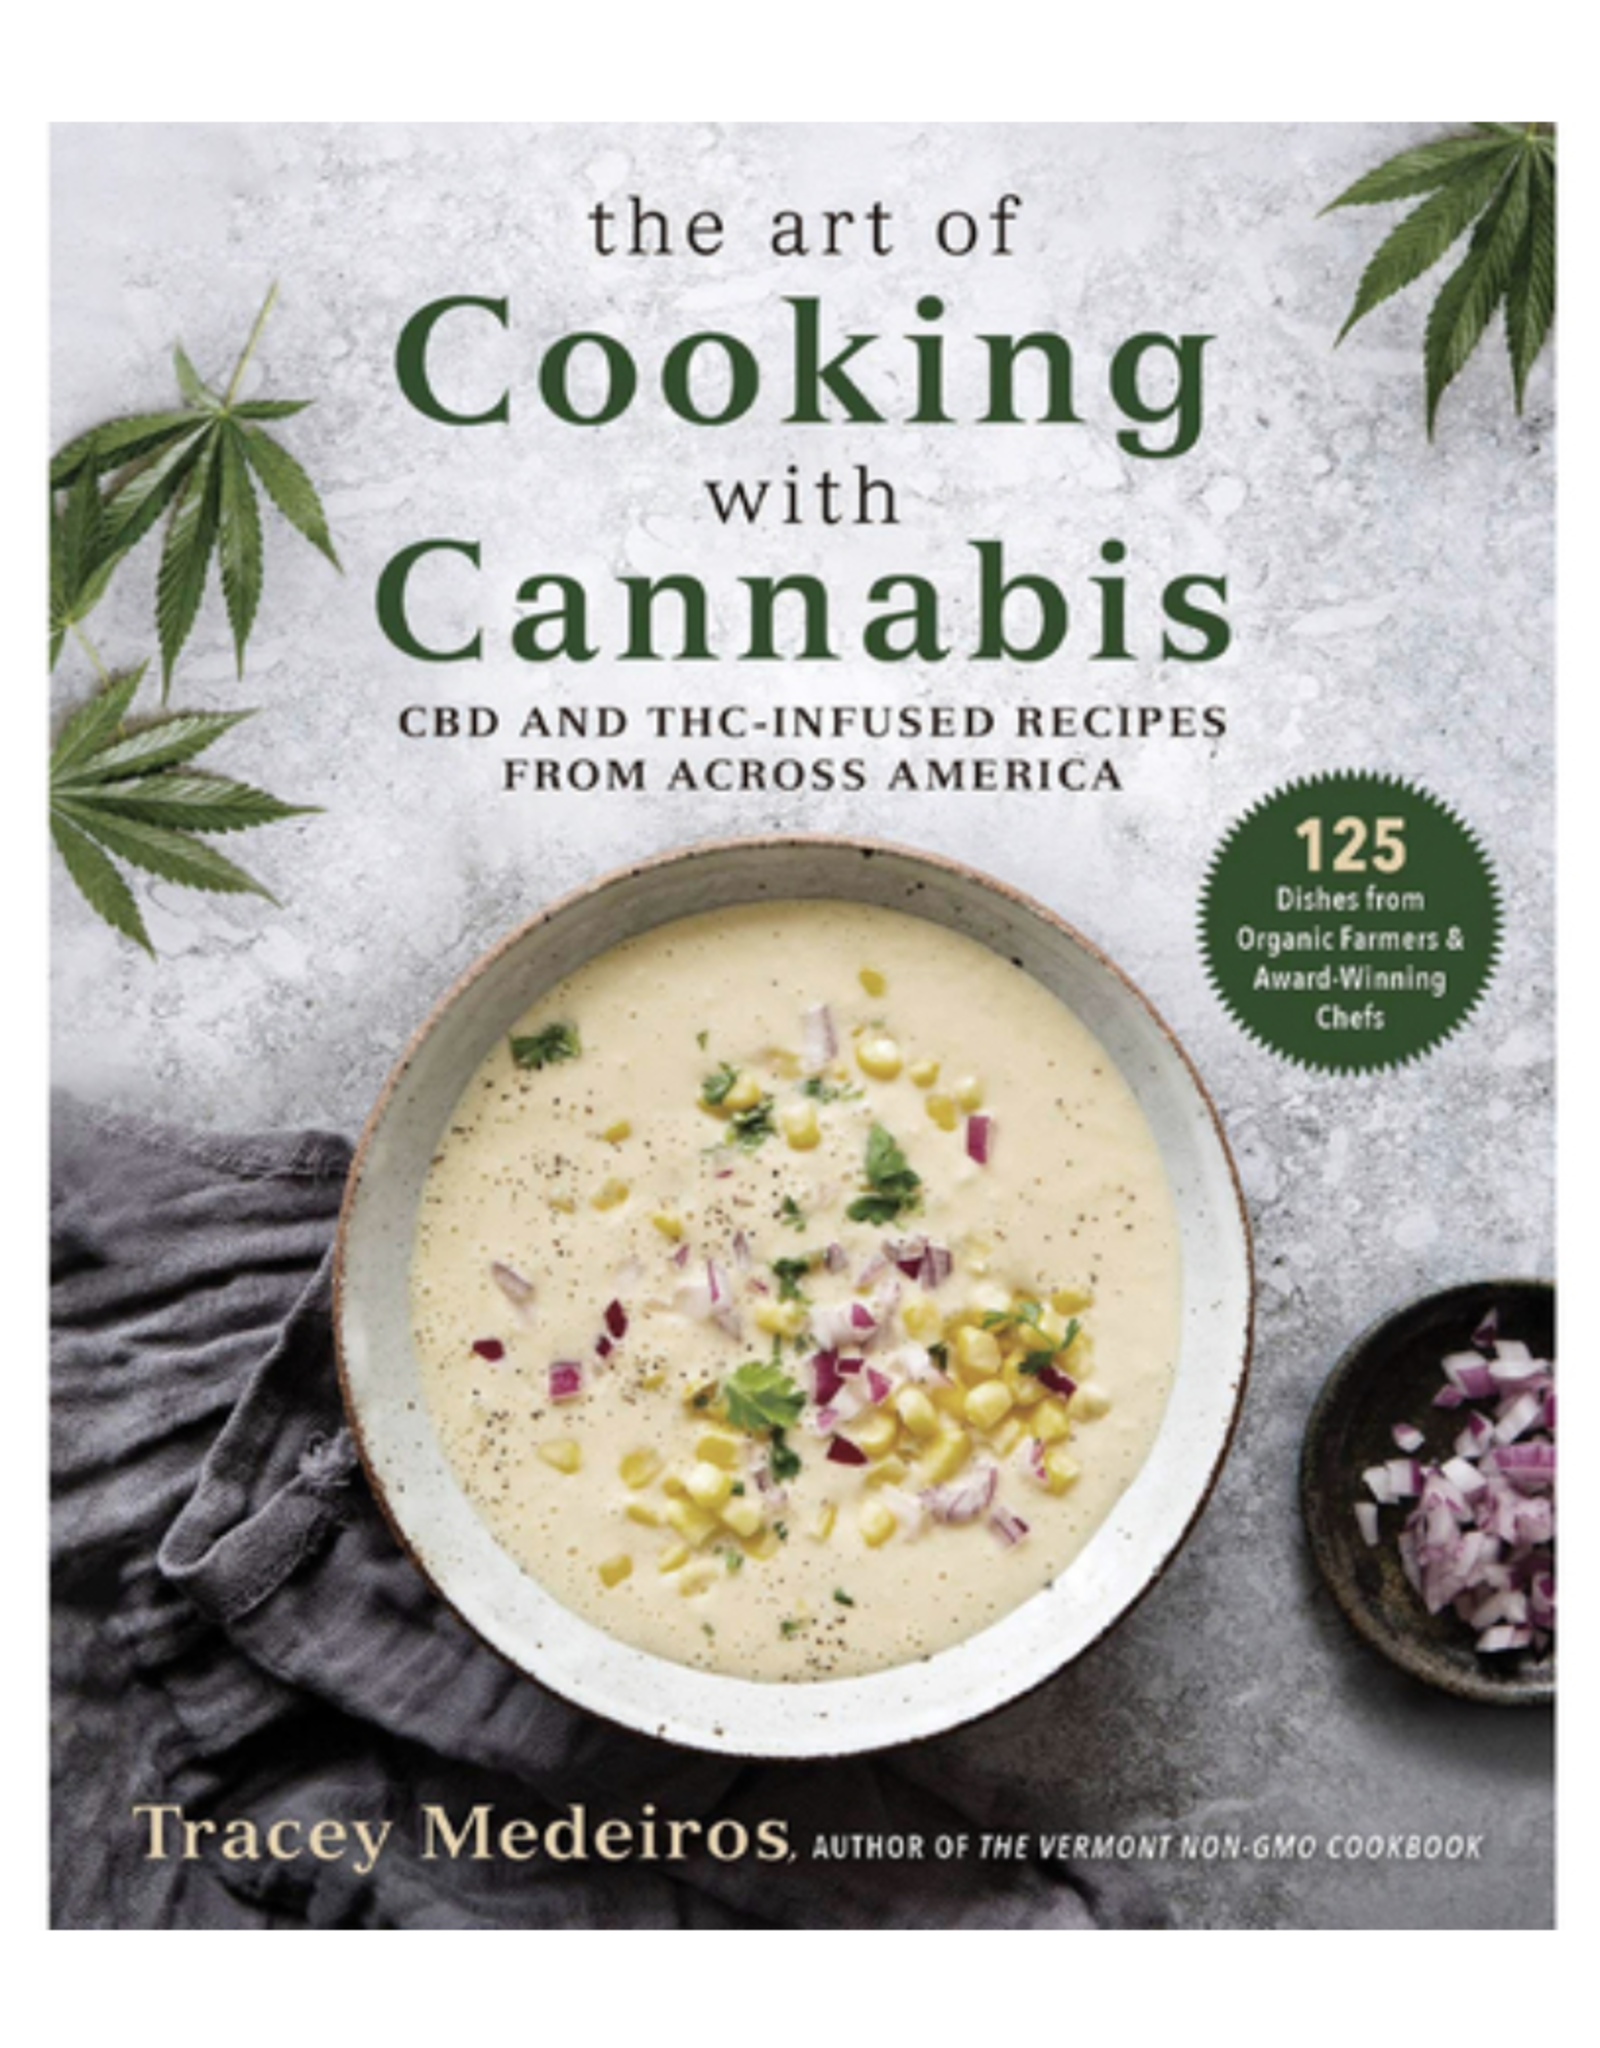 The Art of Cooking with Cannabis by Tracey Medeiros